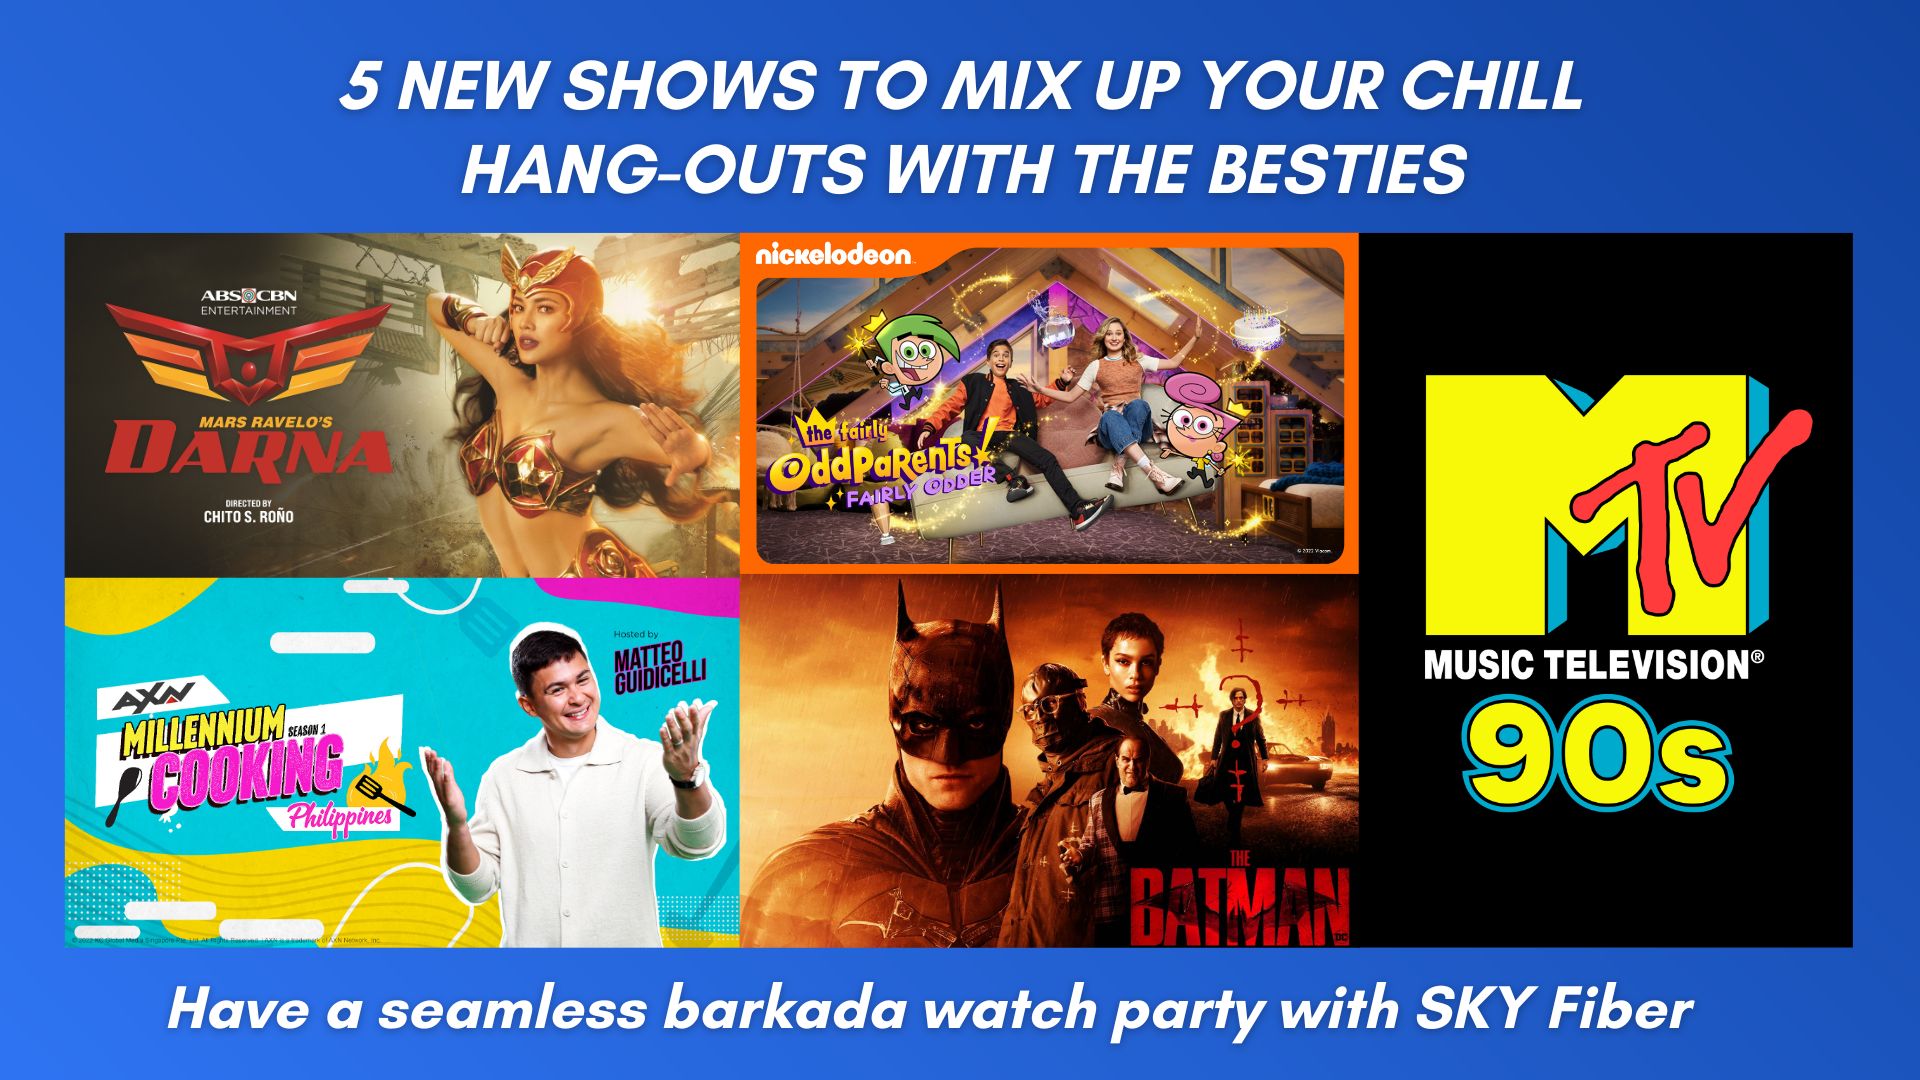 5 new shows to mix up your chill hang outs with the besties